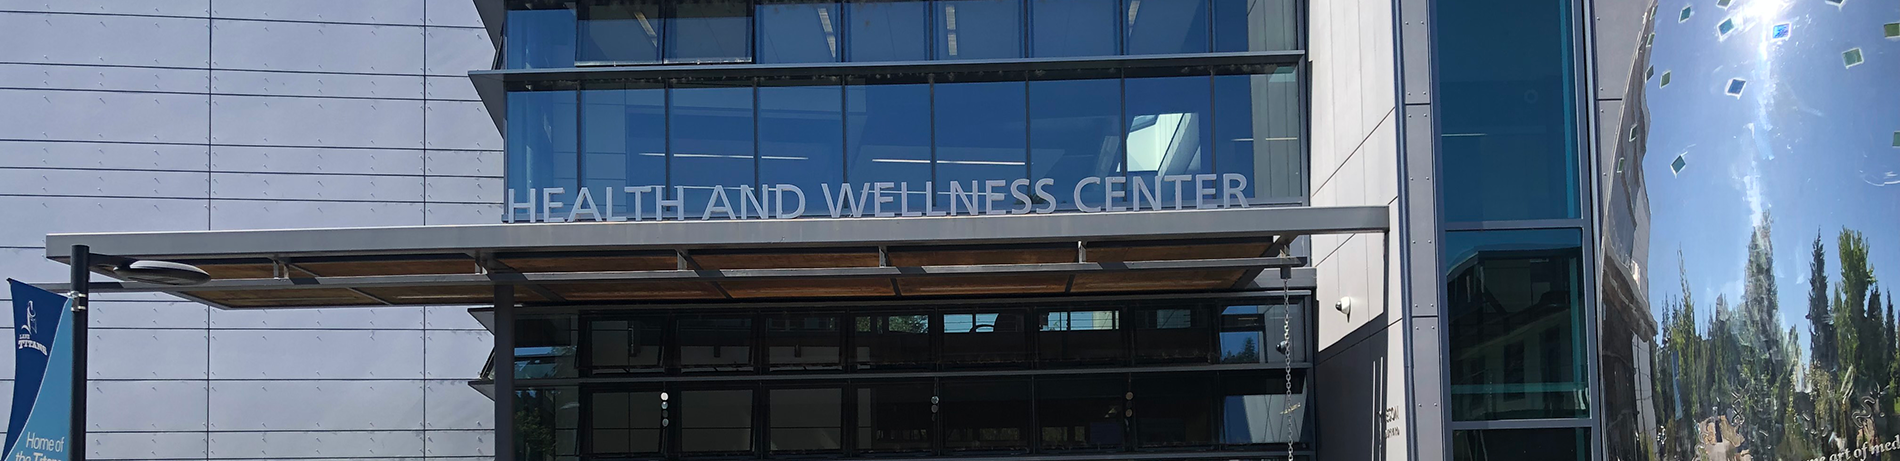 exterior of bldg 30 with sign reading "Health and Wellness Center"